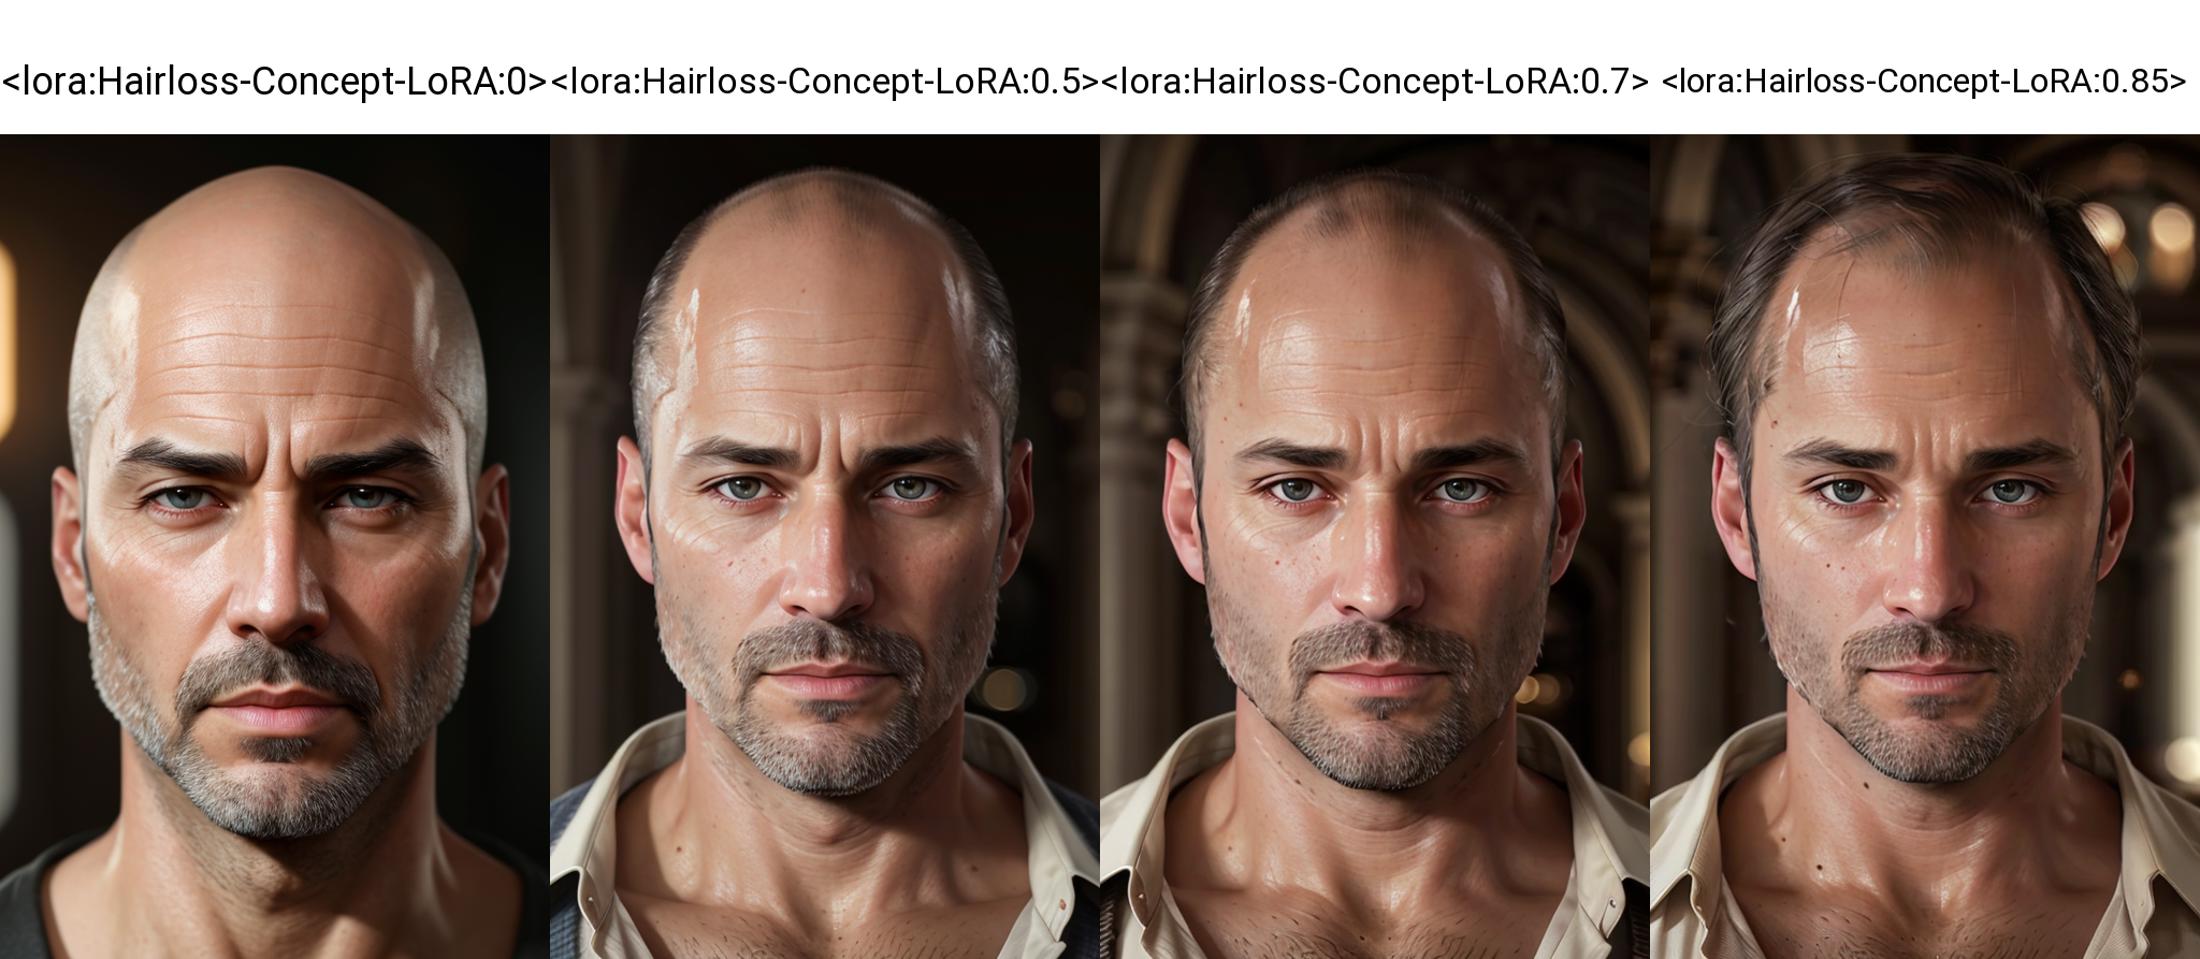 Hairloss Concept image by airesearch